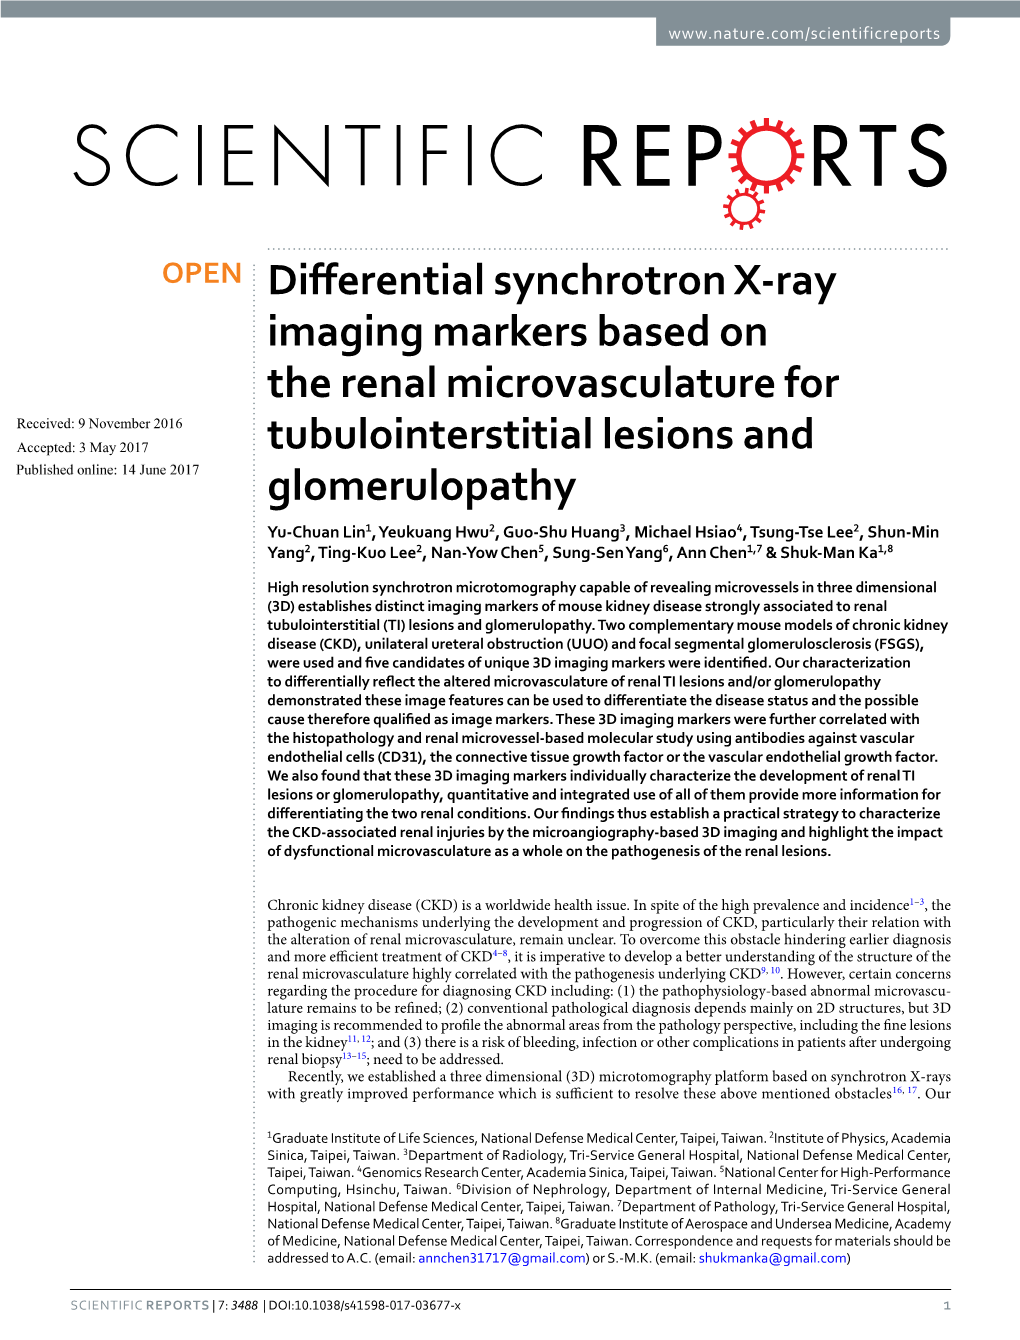 Differential Synchrotron X-Ray Imaging Markers Based on the Renal